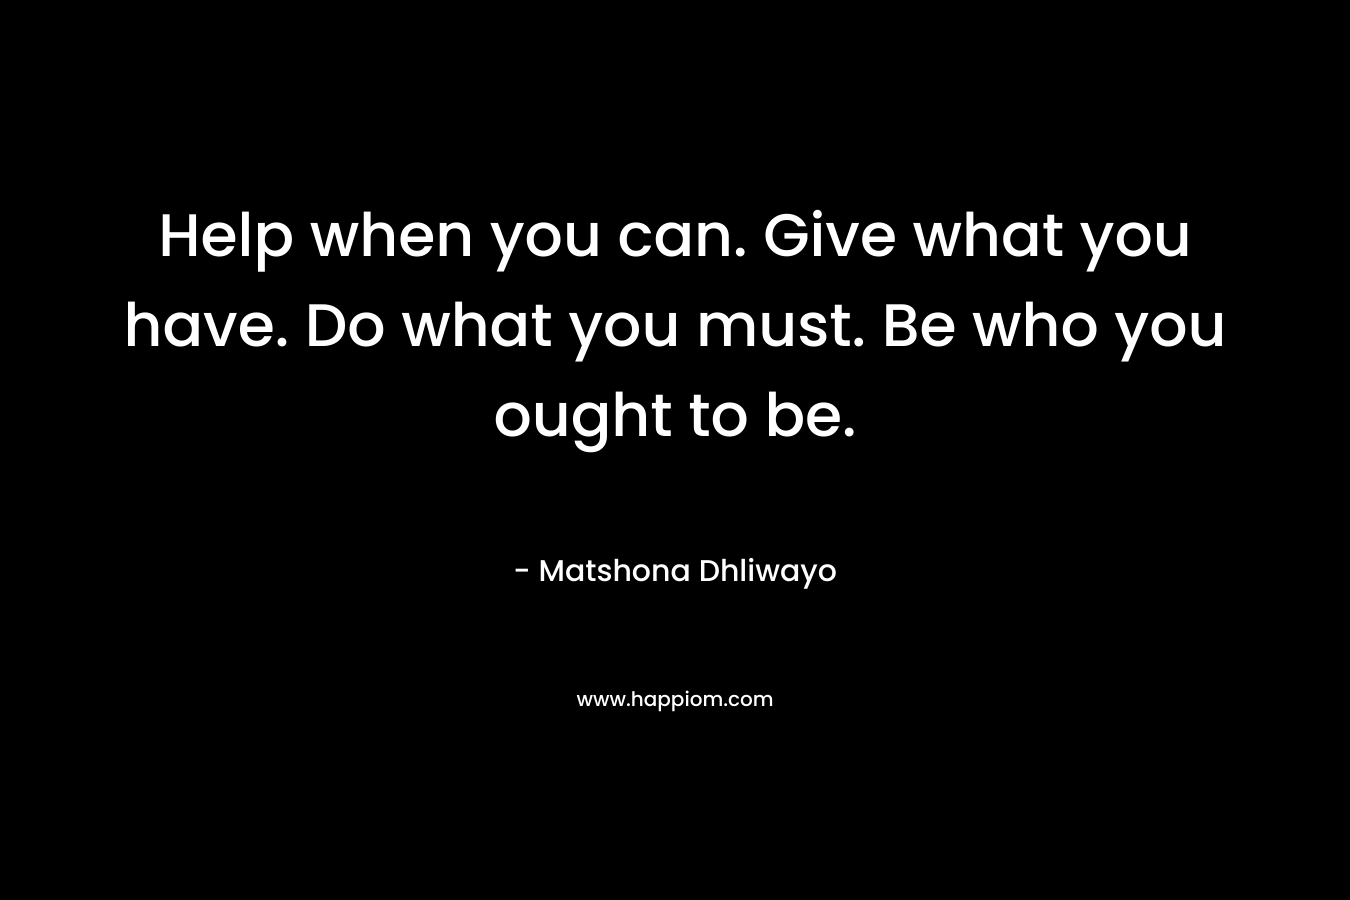 Help when you can. Give what you have. Do what you must. Be who you ought to be.